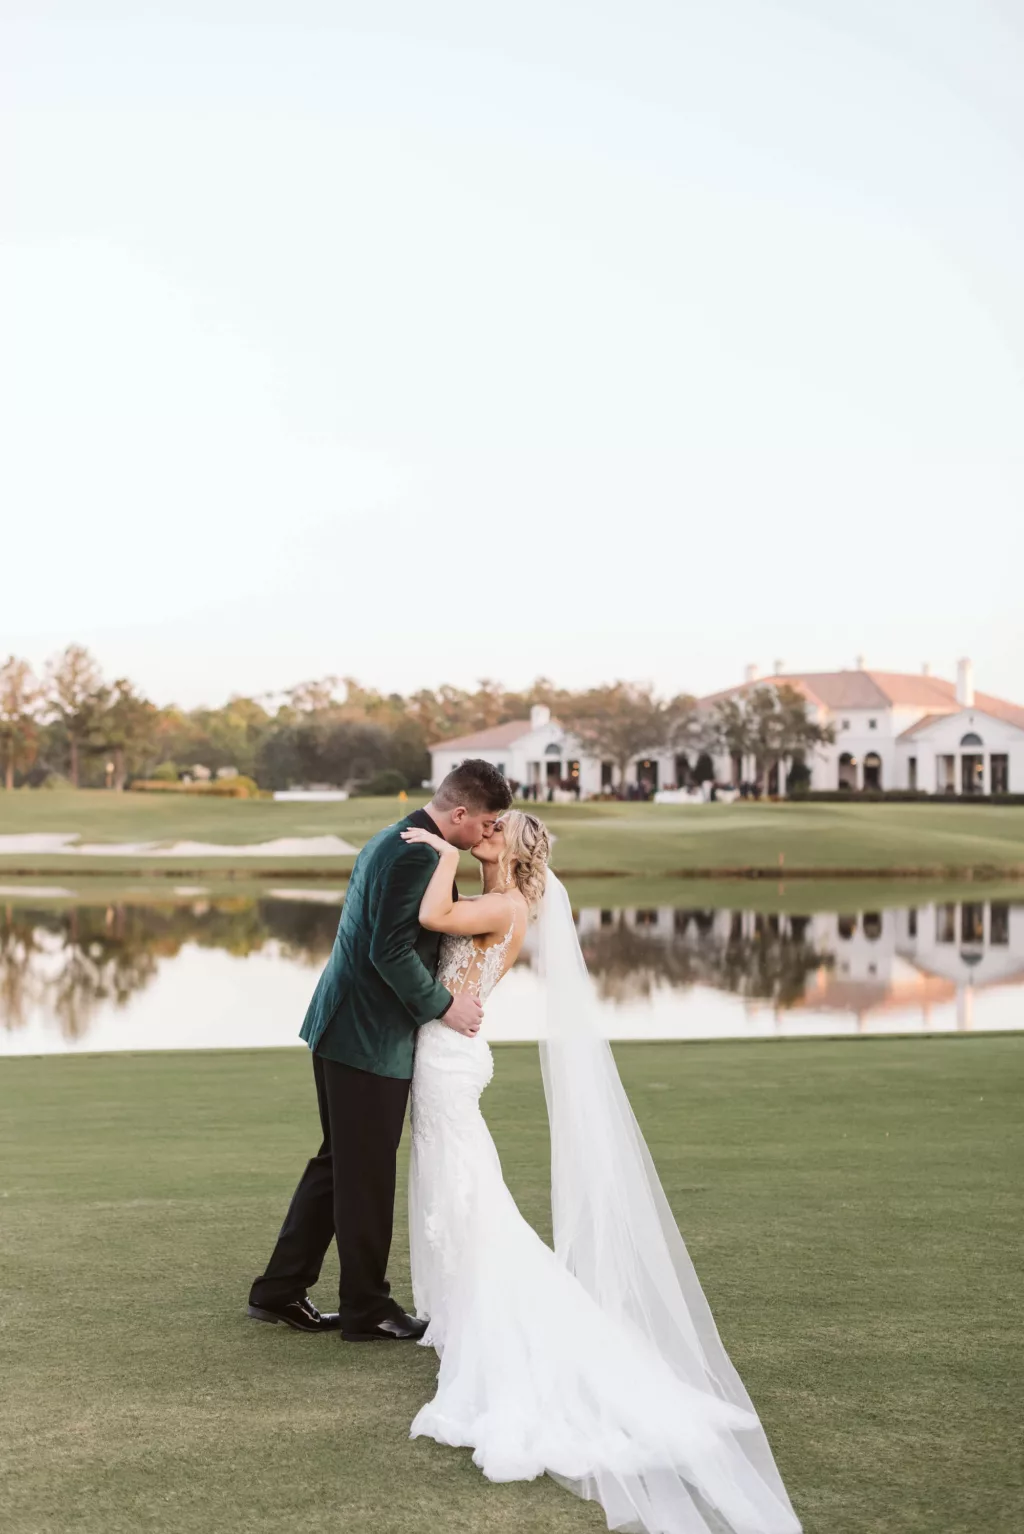 Intimate Bride and Groom Sunset Golf Course Wedding Portrait | Tampa Bay Event Venue The Concession Golf Club | Planner Parties A'La Carte